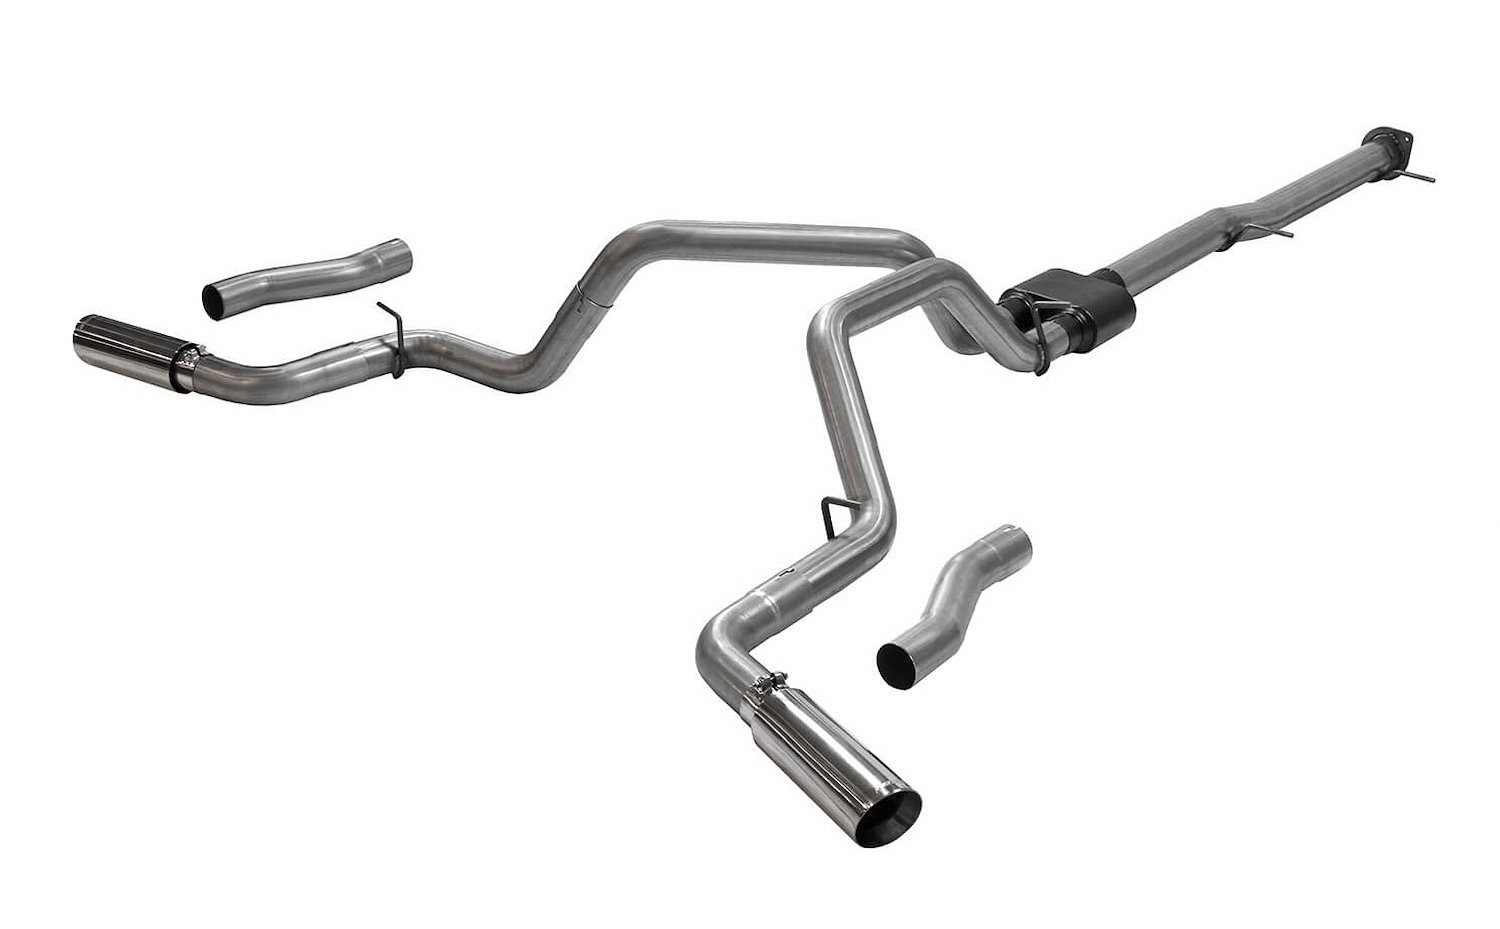 Outlaw Cat-Back Exhaust System fits Select Chevy Silverado, GMC Sierra 2500HD/3500HD Pickup Truck 6.6L (Crew Cab)